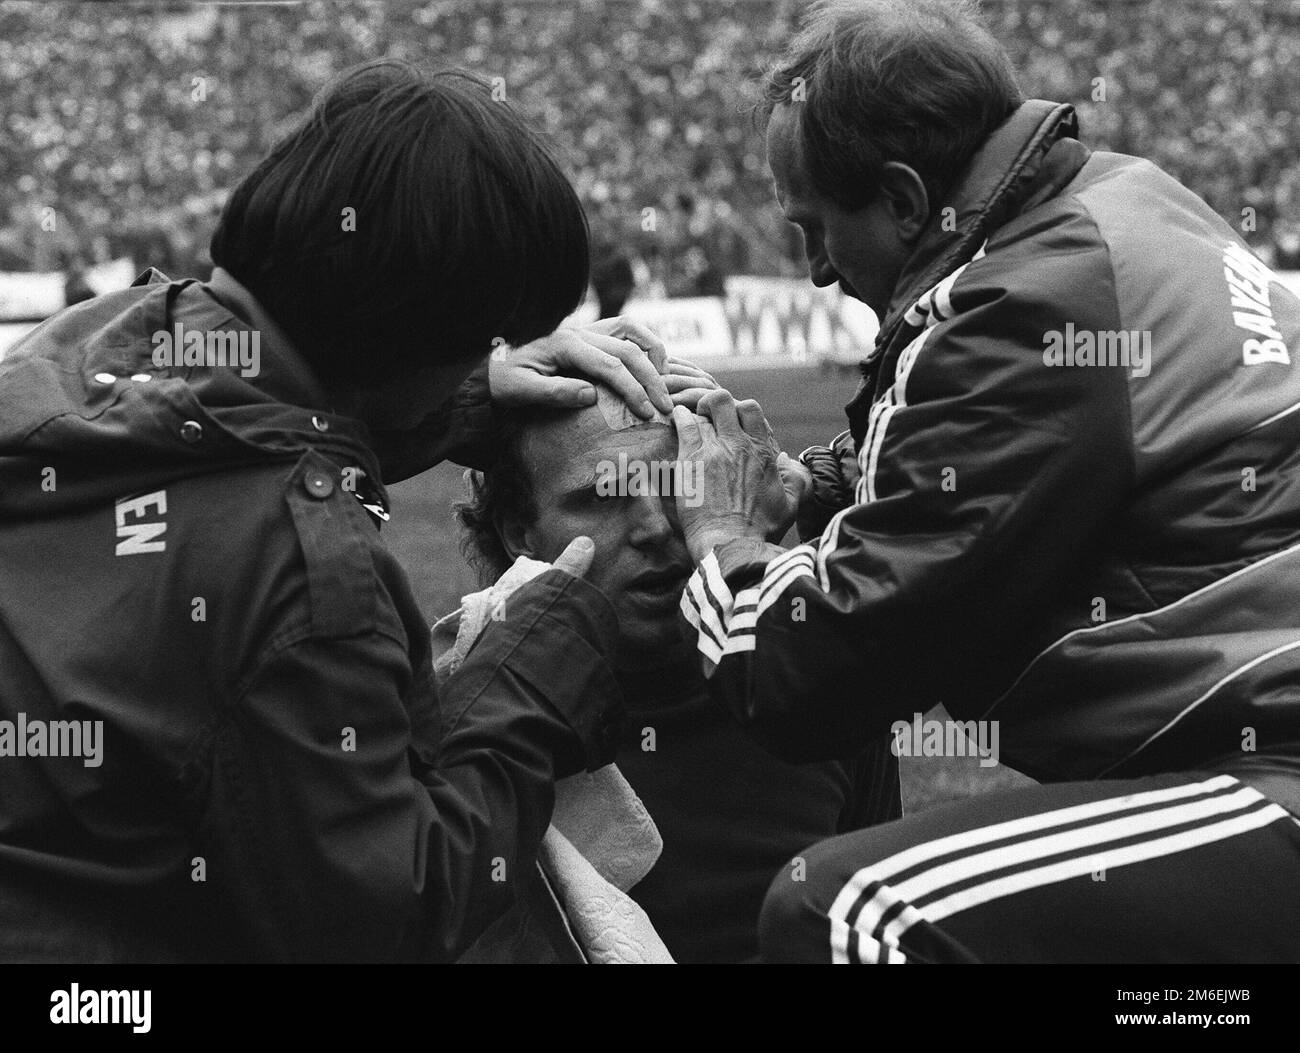 ARCHIVE PHOTO: Dieter Hoeness celebrates his 70th birthday on January 7, 2023, 11SN D Hoeness010582SP.jpg DFB Pokal Finale in Frankfurt, FC Bayern Munich: 1.FC Nuremberg 4:2, Dieter Hoeness with a bleeding head wound is on the sidelines by the team doctor (left) and physiotherapists (r.) treated Qf. SVEN SIMON, Huyssenallee 40-42,45128 Essen#tel.0201/23 45 56#fax 0201/23 45 39#account 1428150 Commerzbank Essen BLZ 36040039. Stock Photo